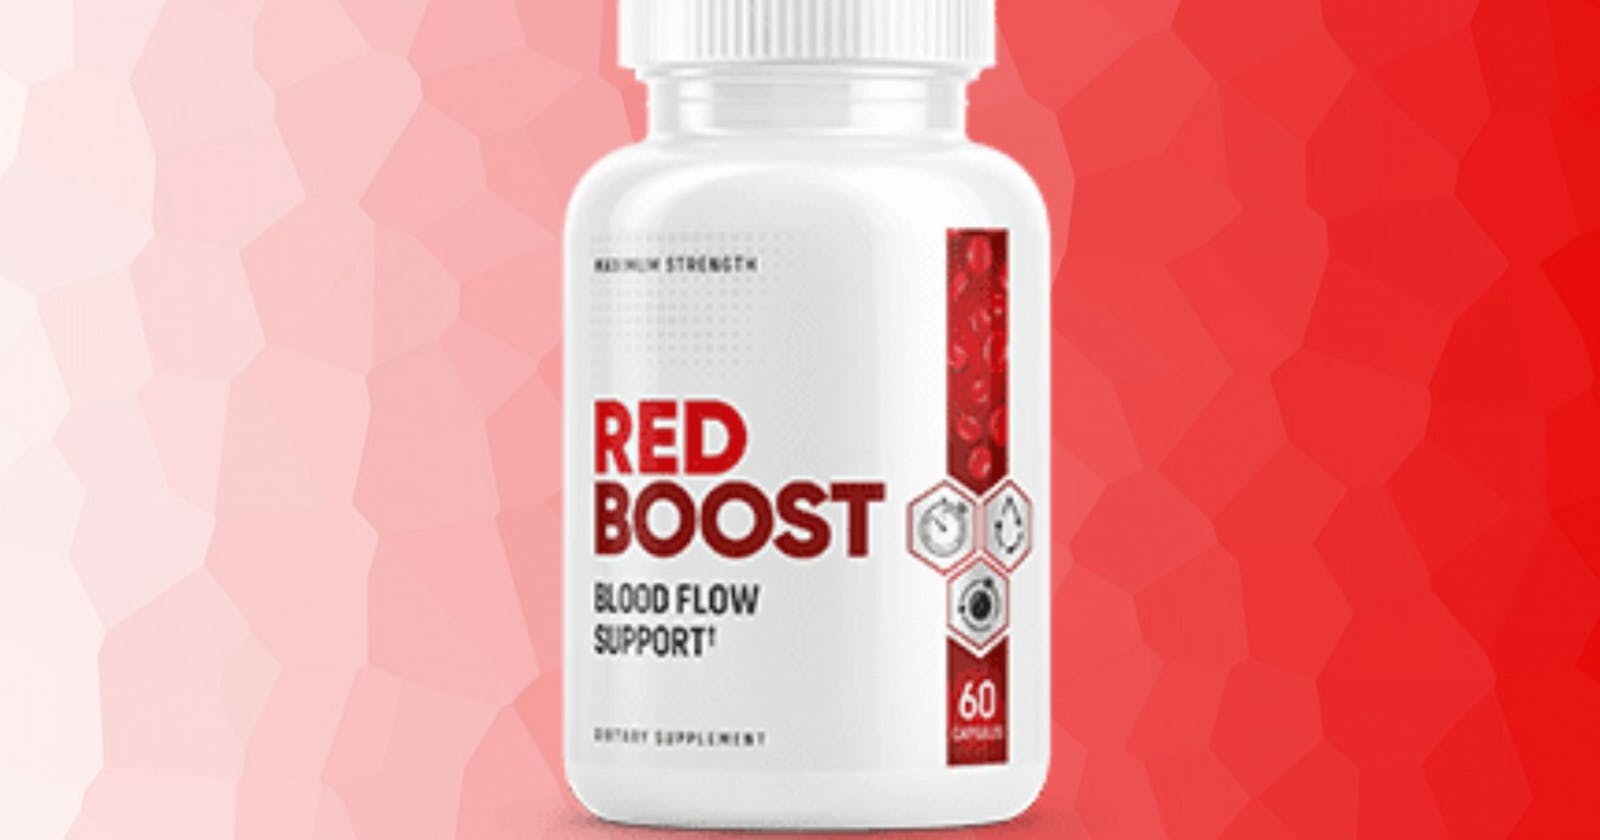 Red Boost - Real Benefits Exposed! Shocking Customer Reviews?